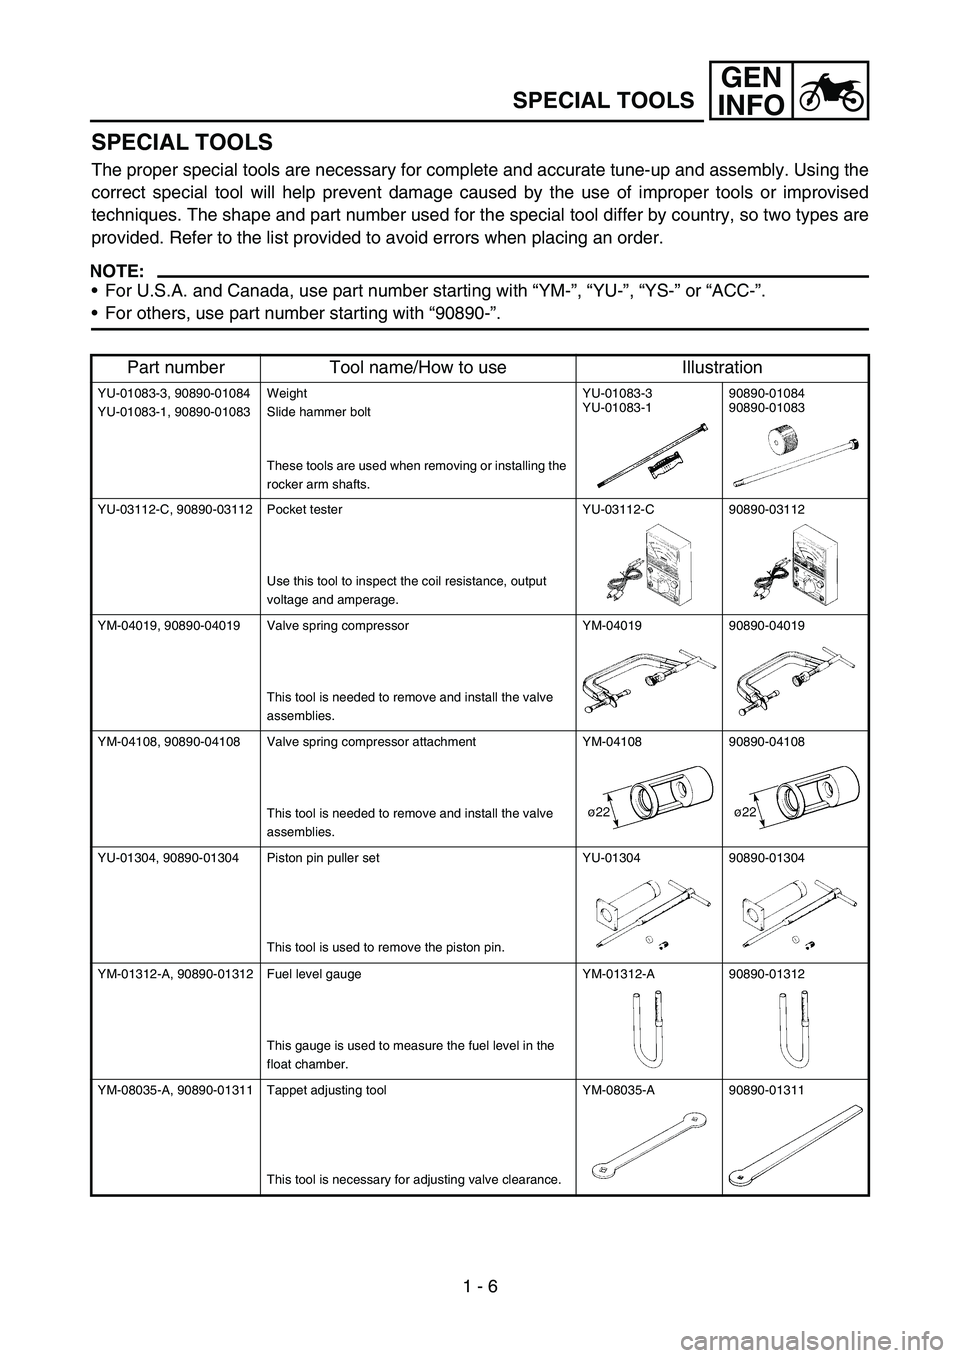 YAMAHA TTR50 2006  Owners Manual 
GEN
INFO
1 - 6
SPECIAL TOOLS
SPECIAL TOOLS
The proper special tools are necessary for complete and accurate tune-up and assembly. Using the
correct special tool will help prevent damage caused by the